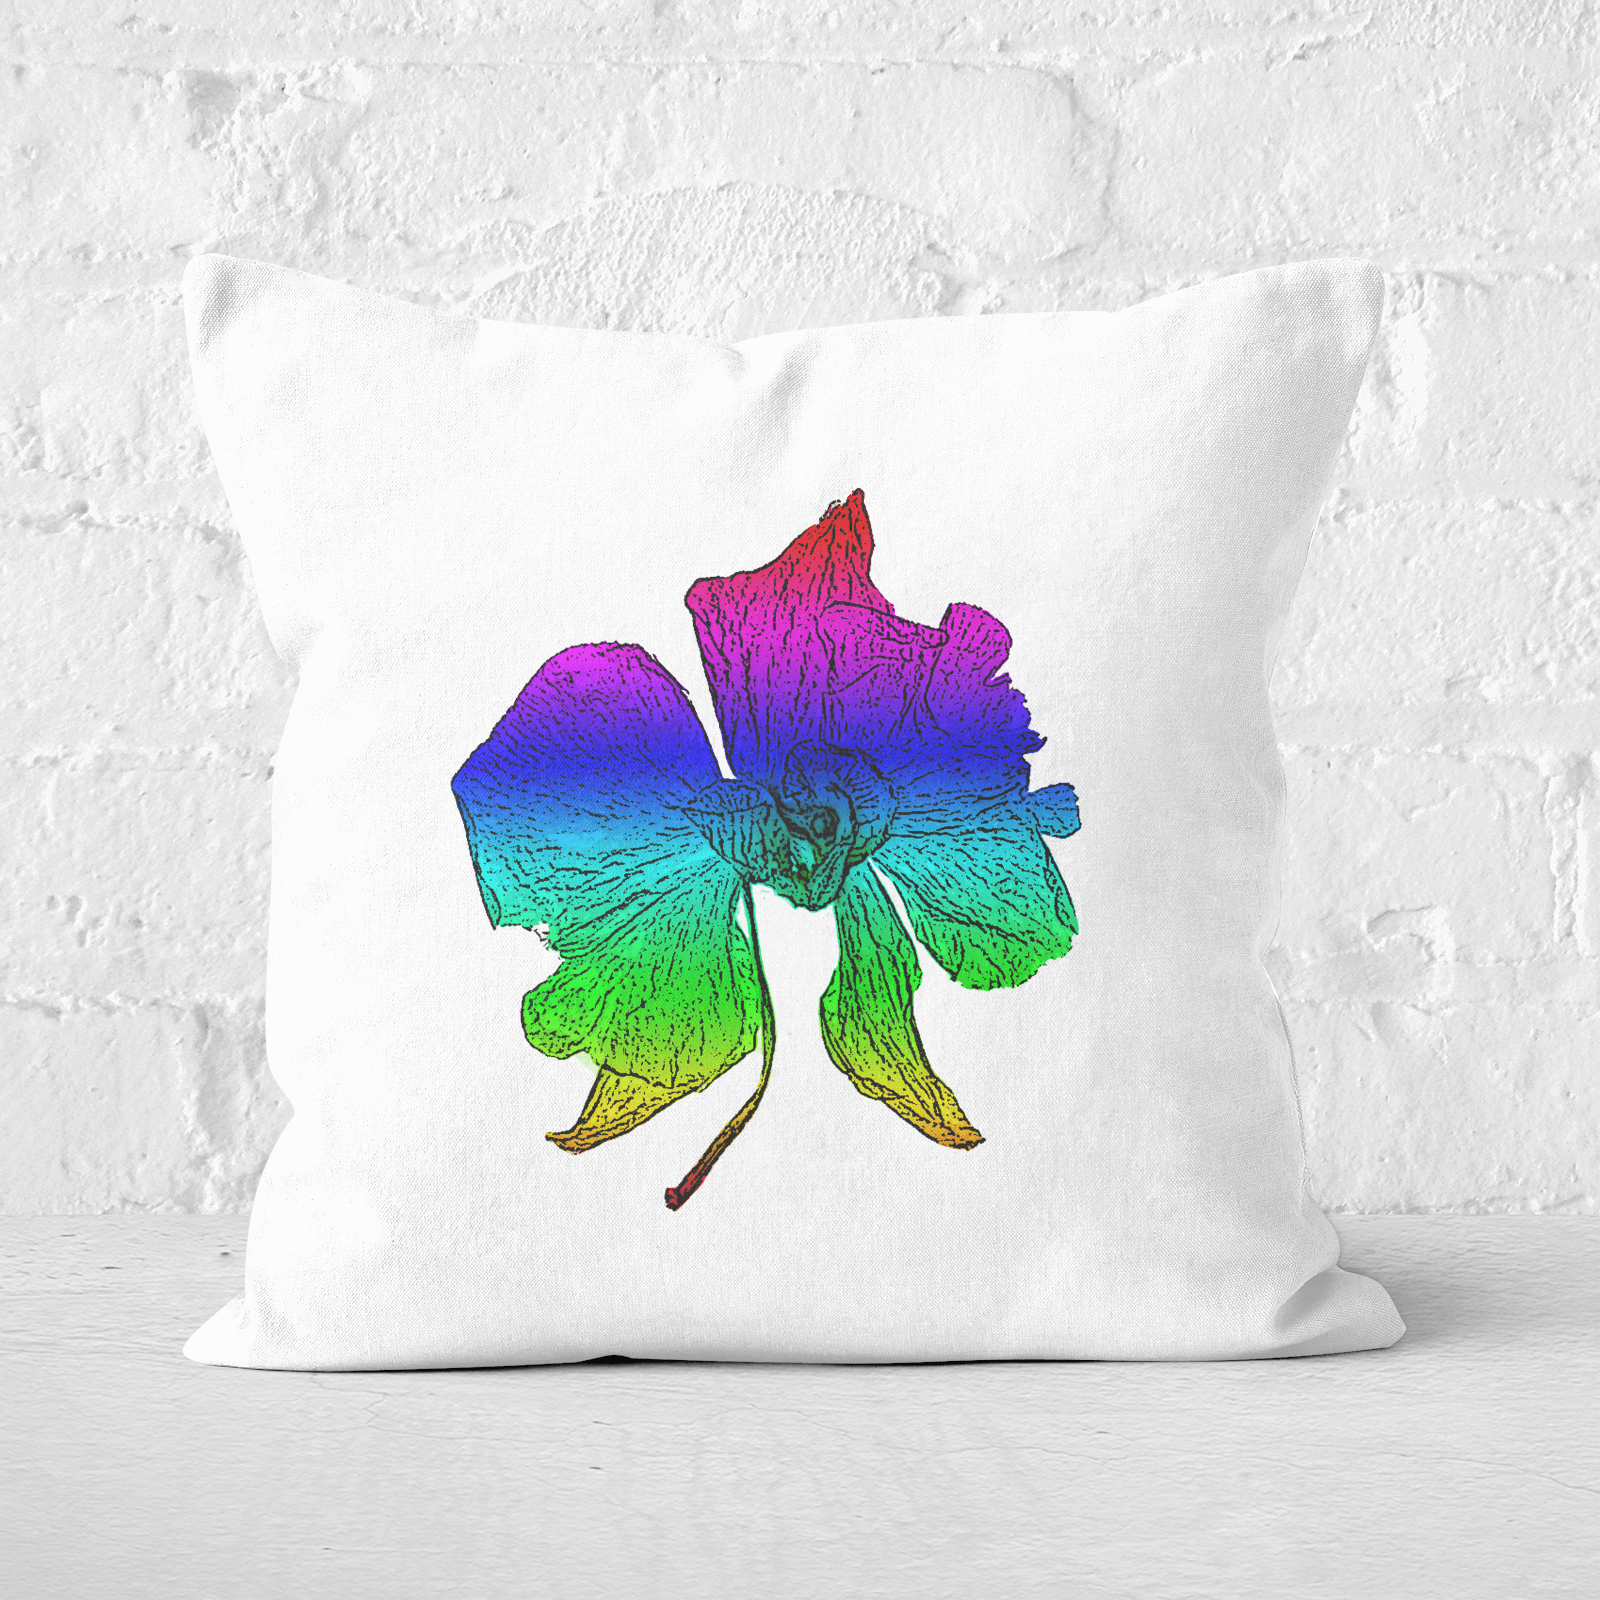 Pressed Flowers Ombre Rainbow Flower Square Cushion - 60x60cm - Soft Touch